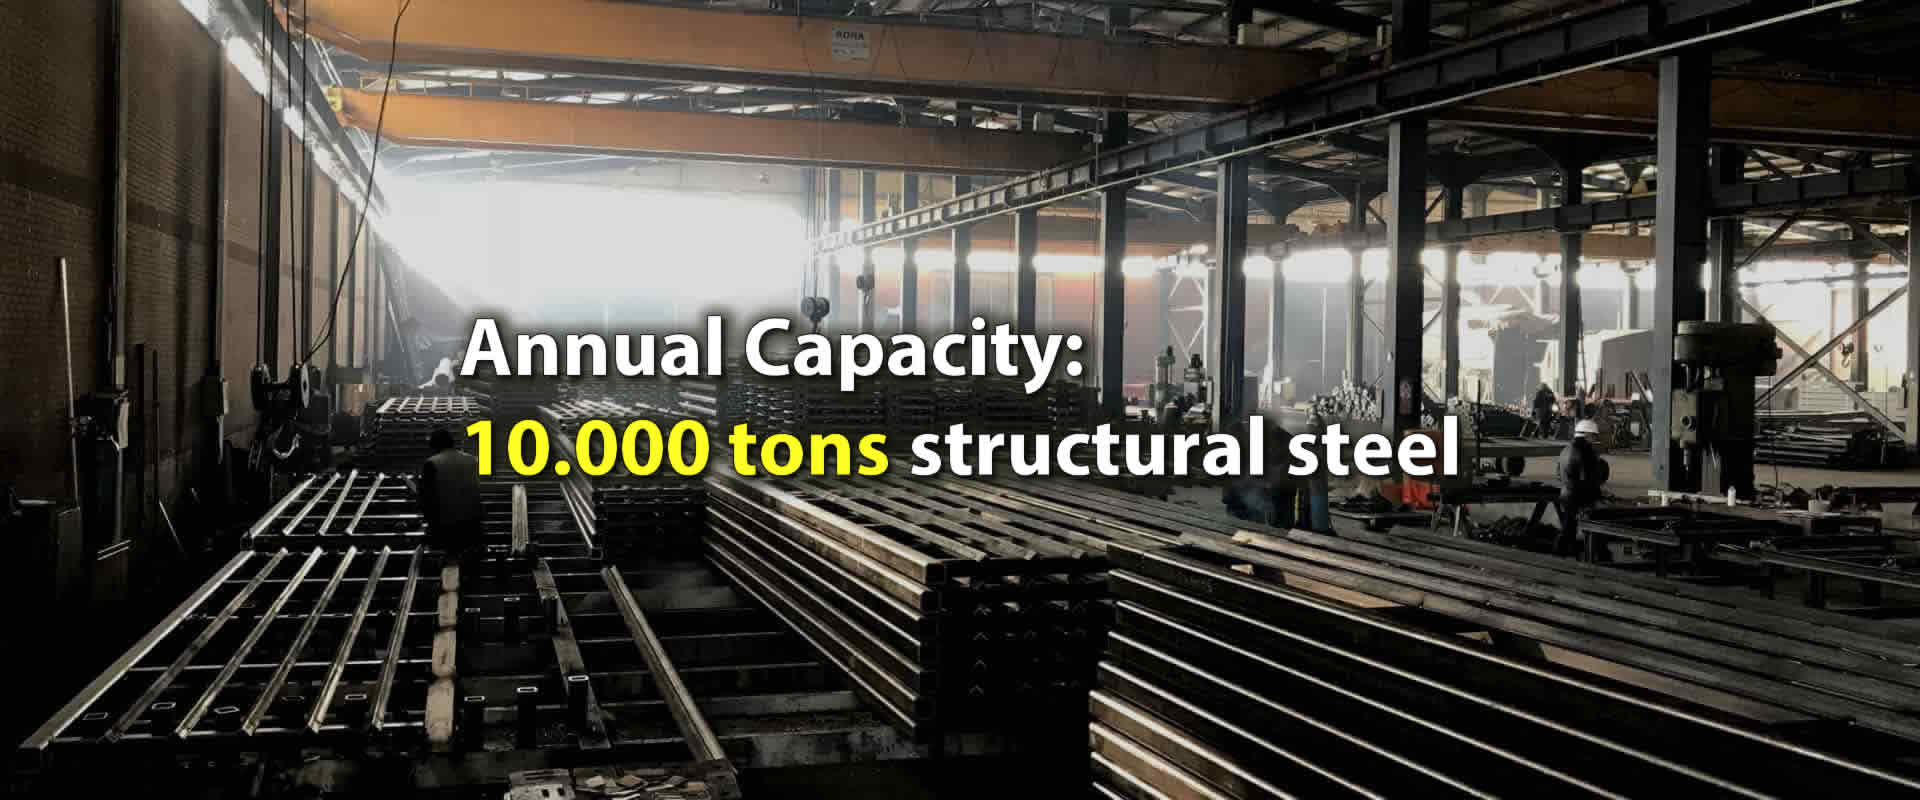 Annual Capacity 10.000 tons structural steel